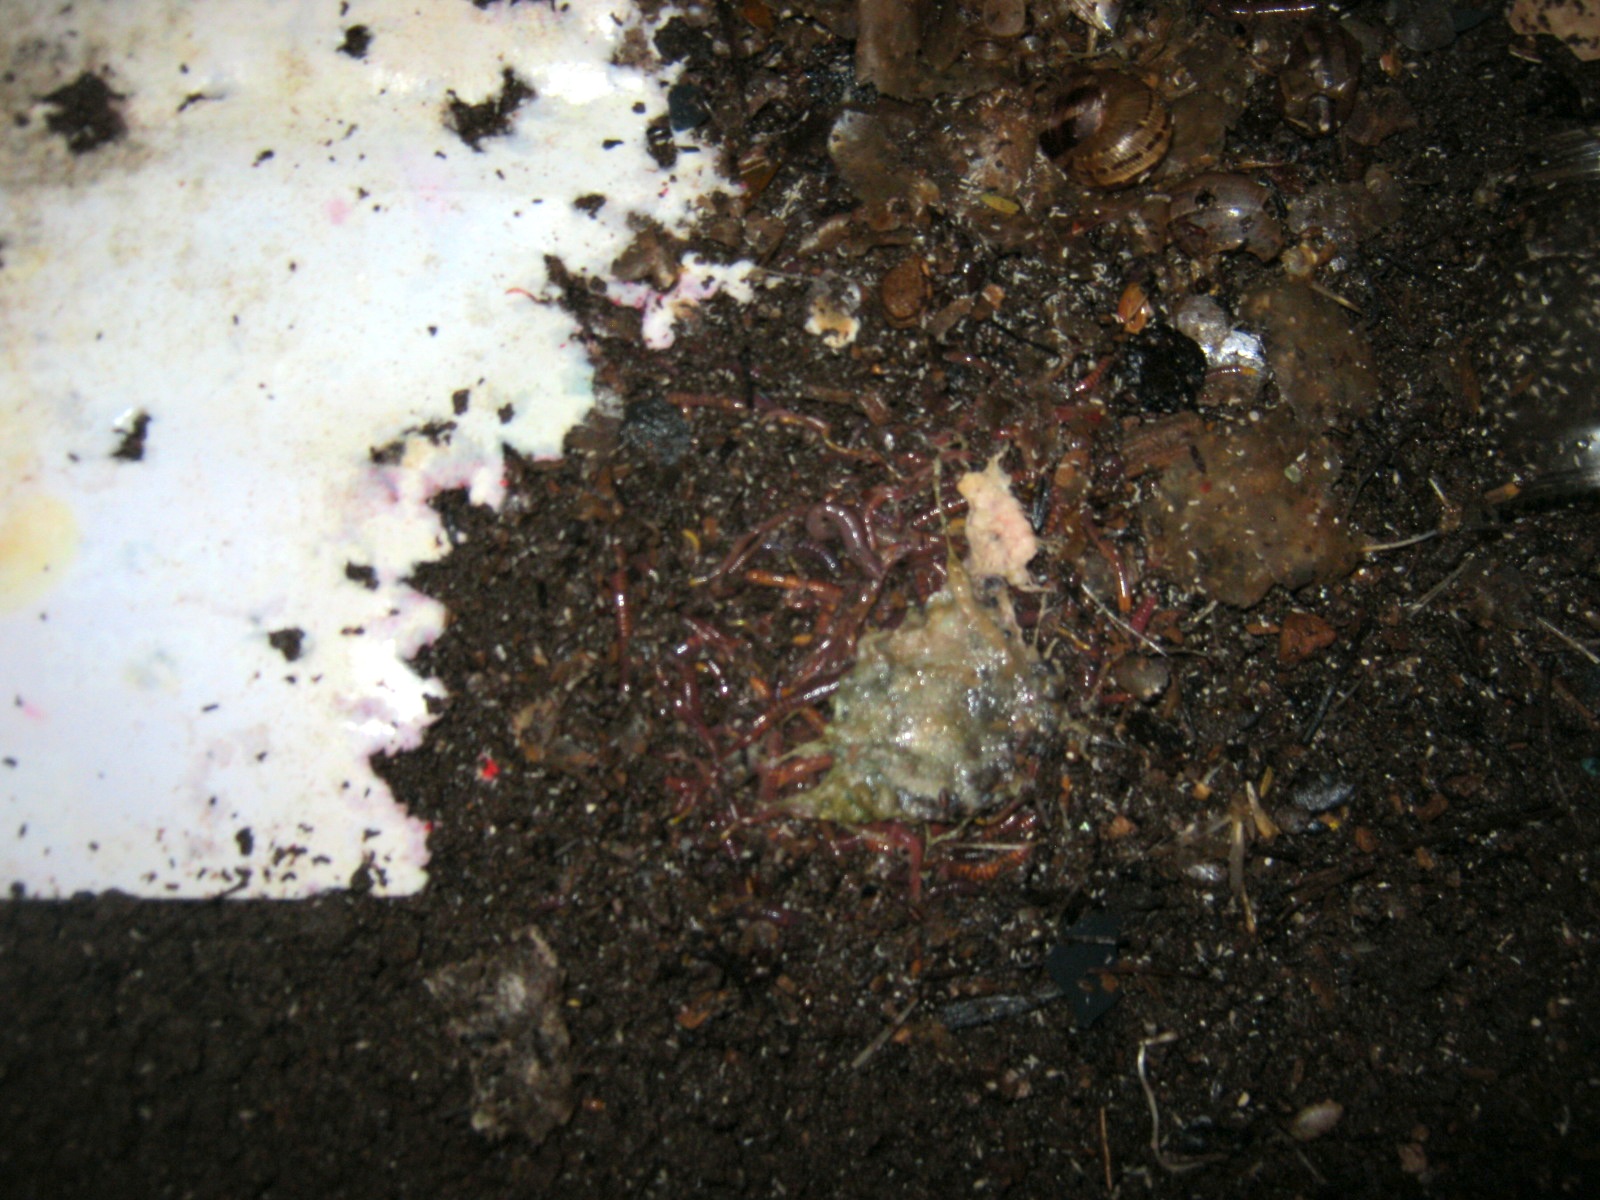 Junk mail being eaten by compost worms